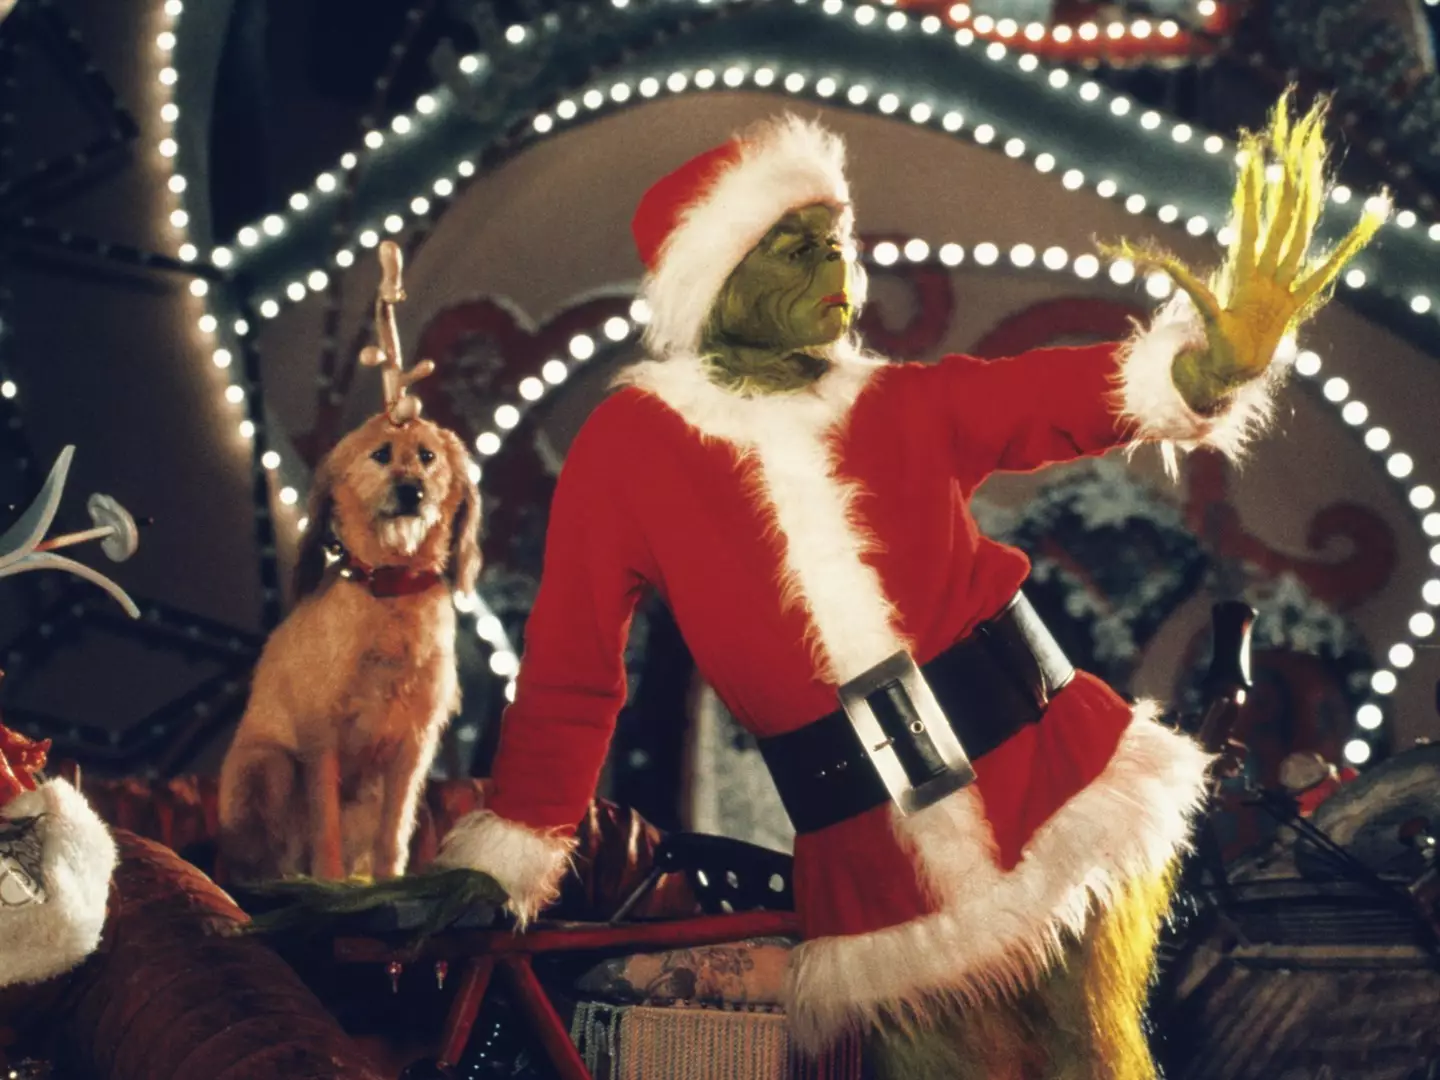 Jim Carrey makes for a hilarious grinch who wants to steal Christmas (